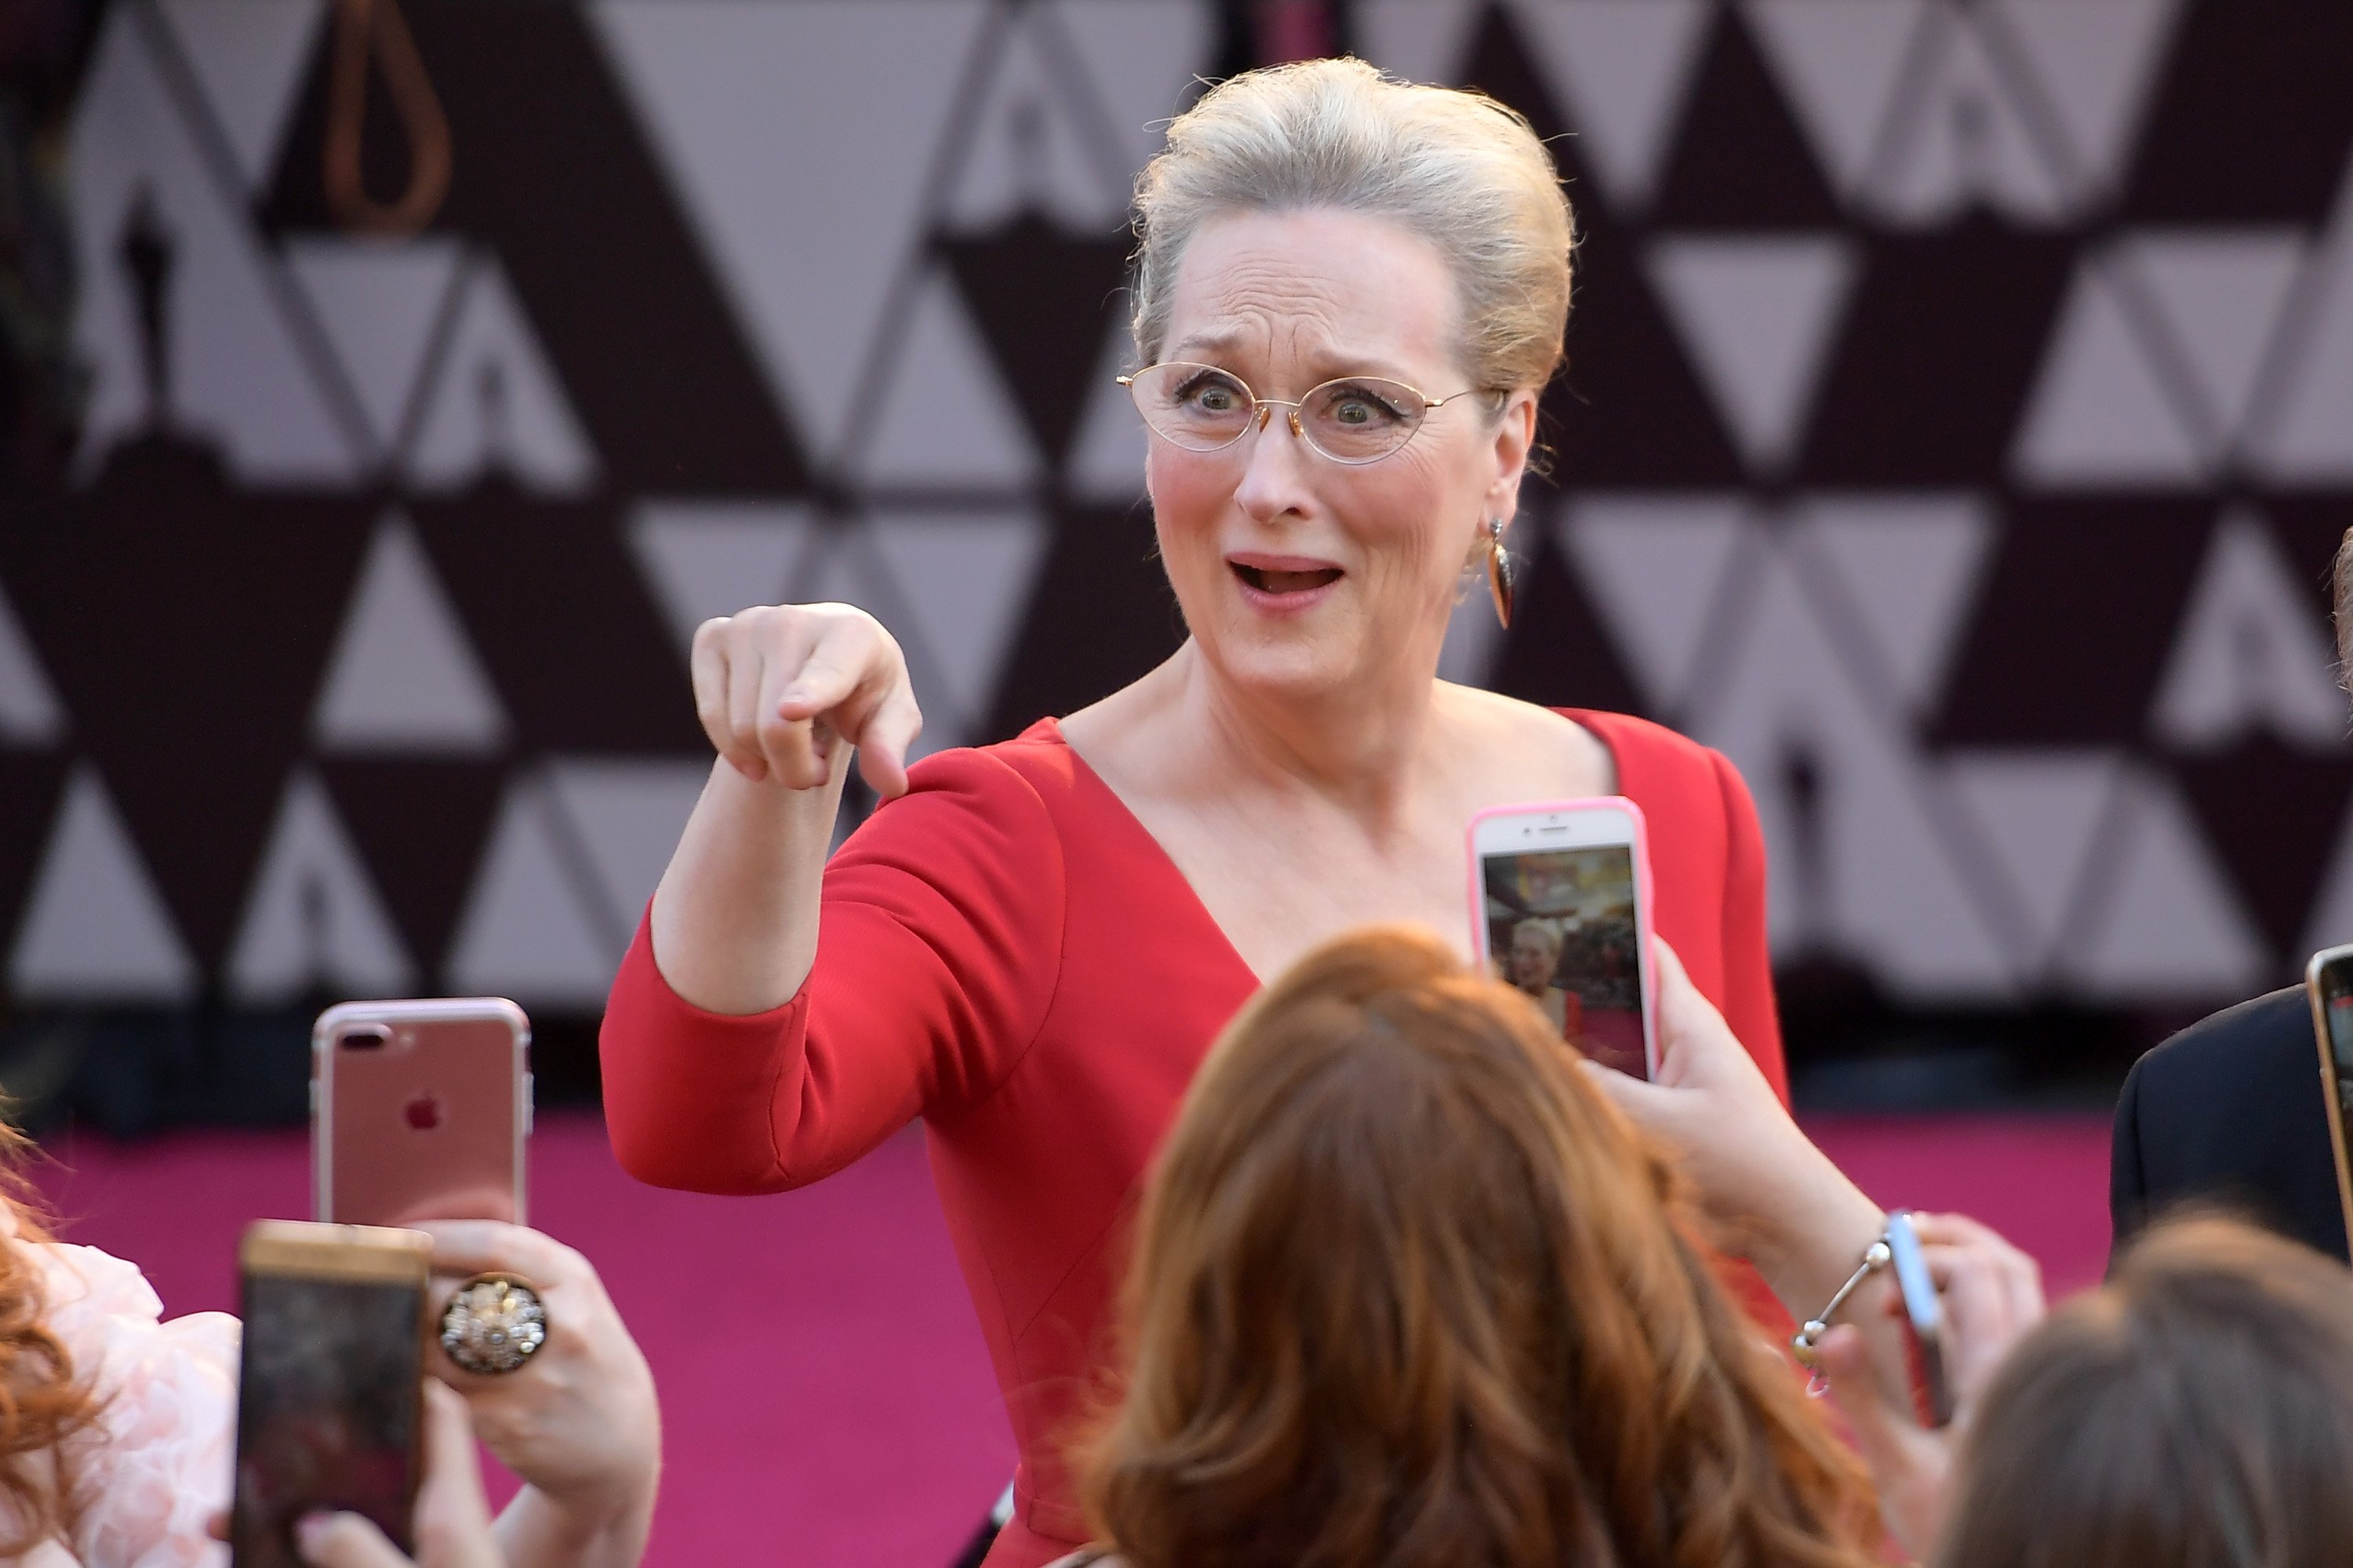 Meryl Streep attends the 90th Annual Academy Awards on March 4, 2018 in Hollywood, California. | Photo: Getty Images